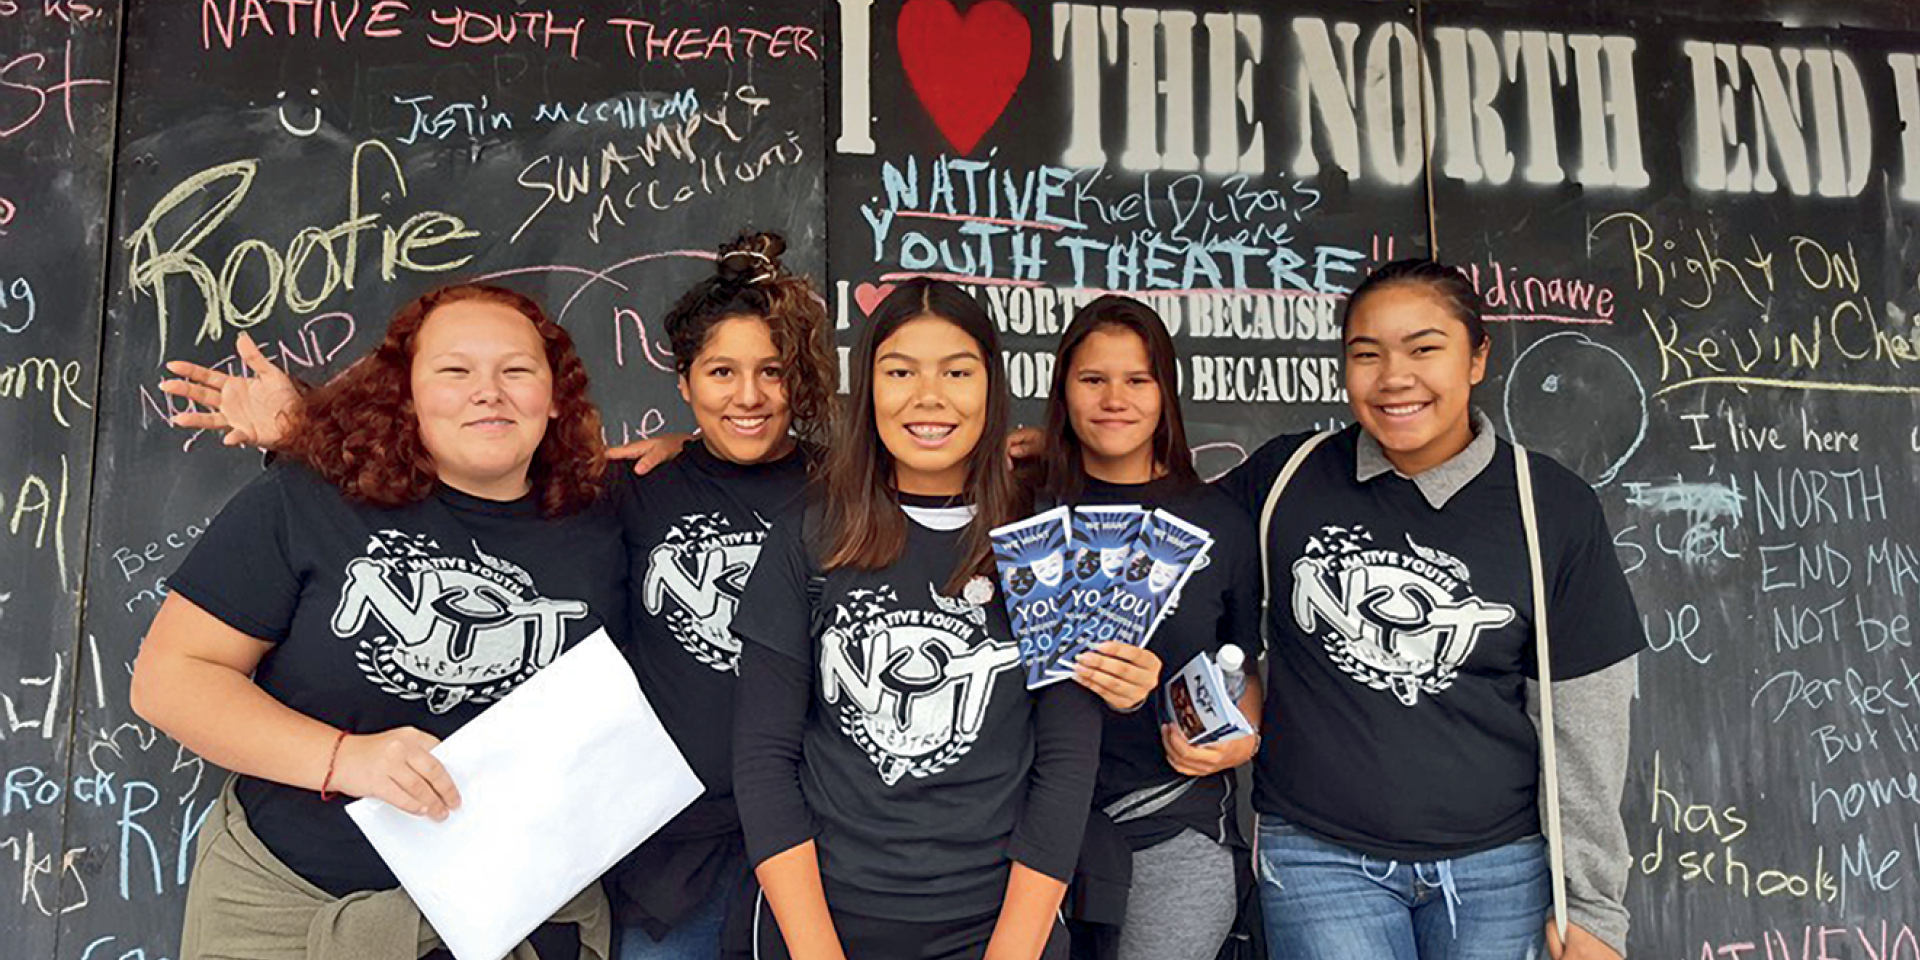 Native Youth Theatre